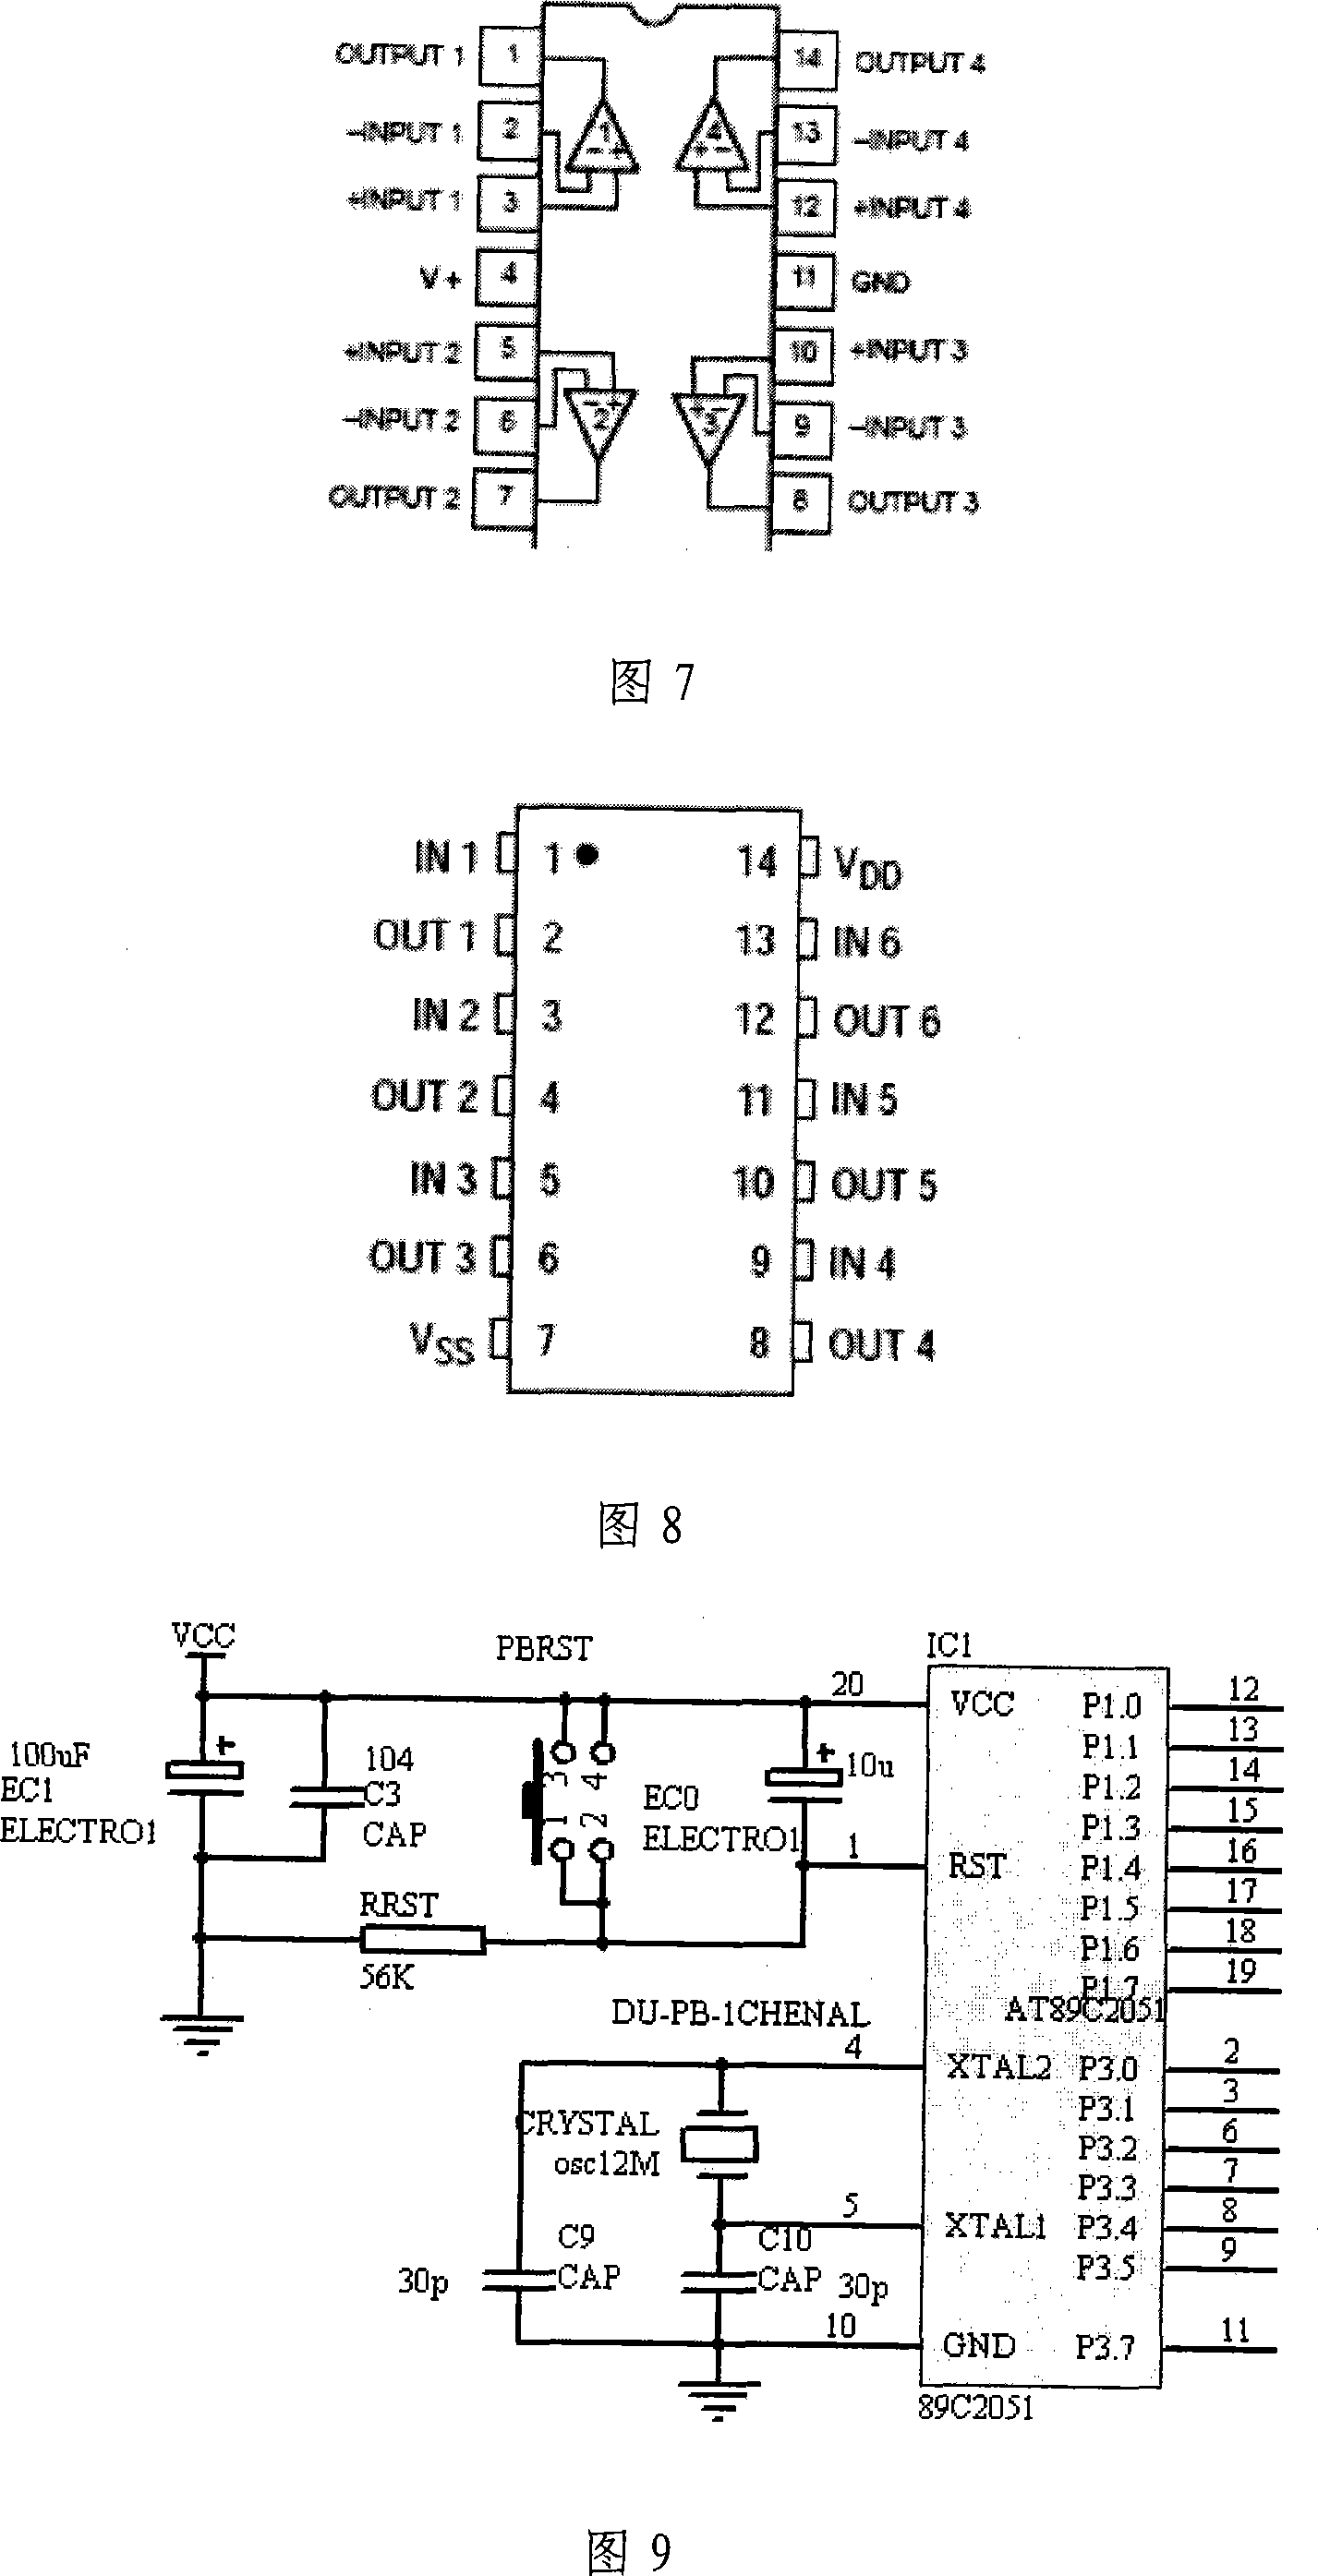 Method of double filum narrow interstice alternating-direct current pulse matching electric arc welding